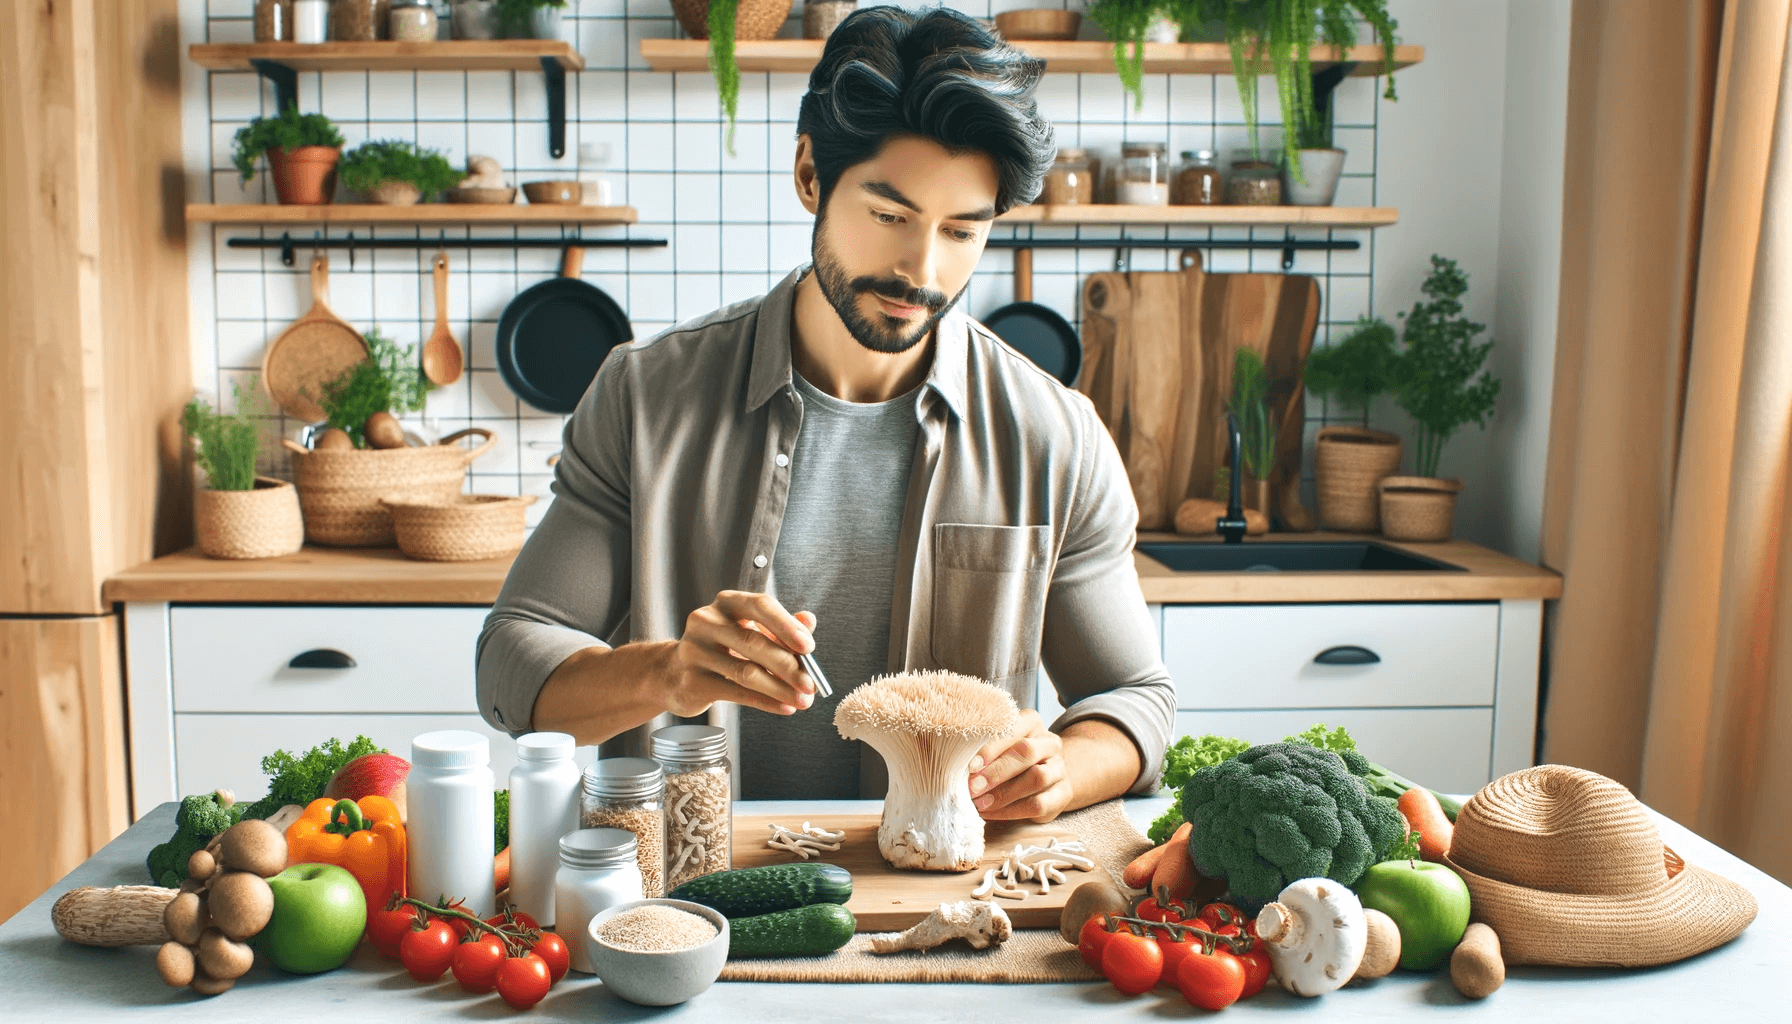 Health enthusiast incorporating Lion's Mane mushroom into a balanced diet and wellness routine, unlocking the full potential of this natural cognitive enhancer